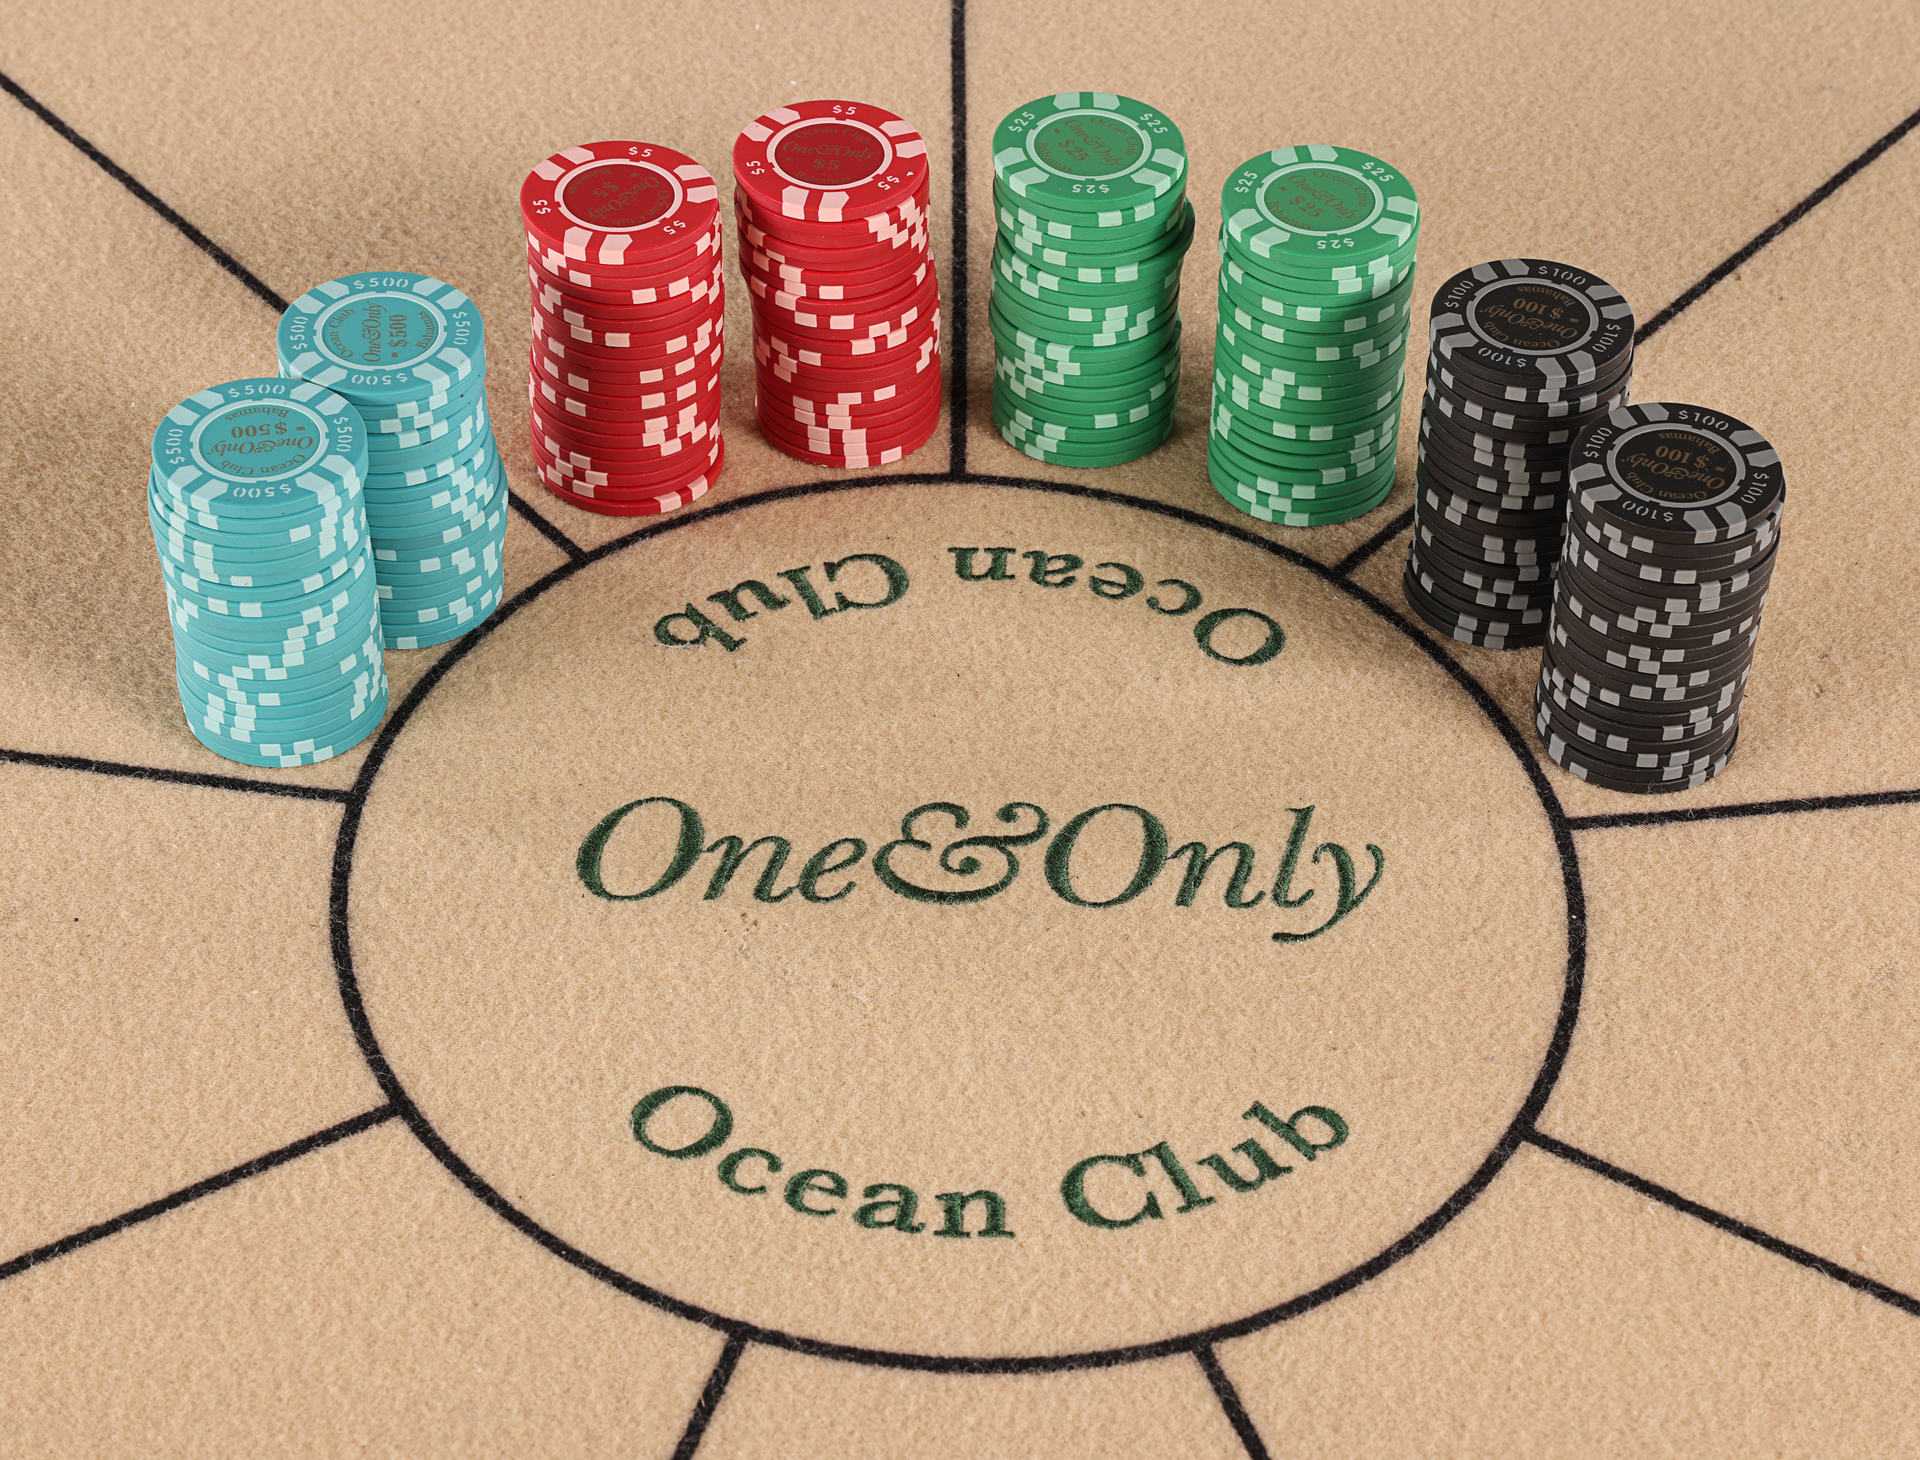 JAMES BOND: CASINO ROYALE (2006) - One & Only Ocean Club Poker Table, Chips and Playing Cards - Image 9 of 16